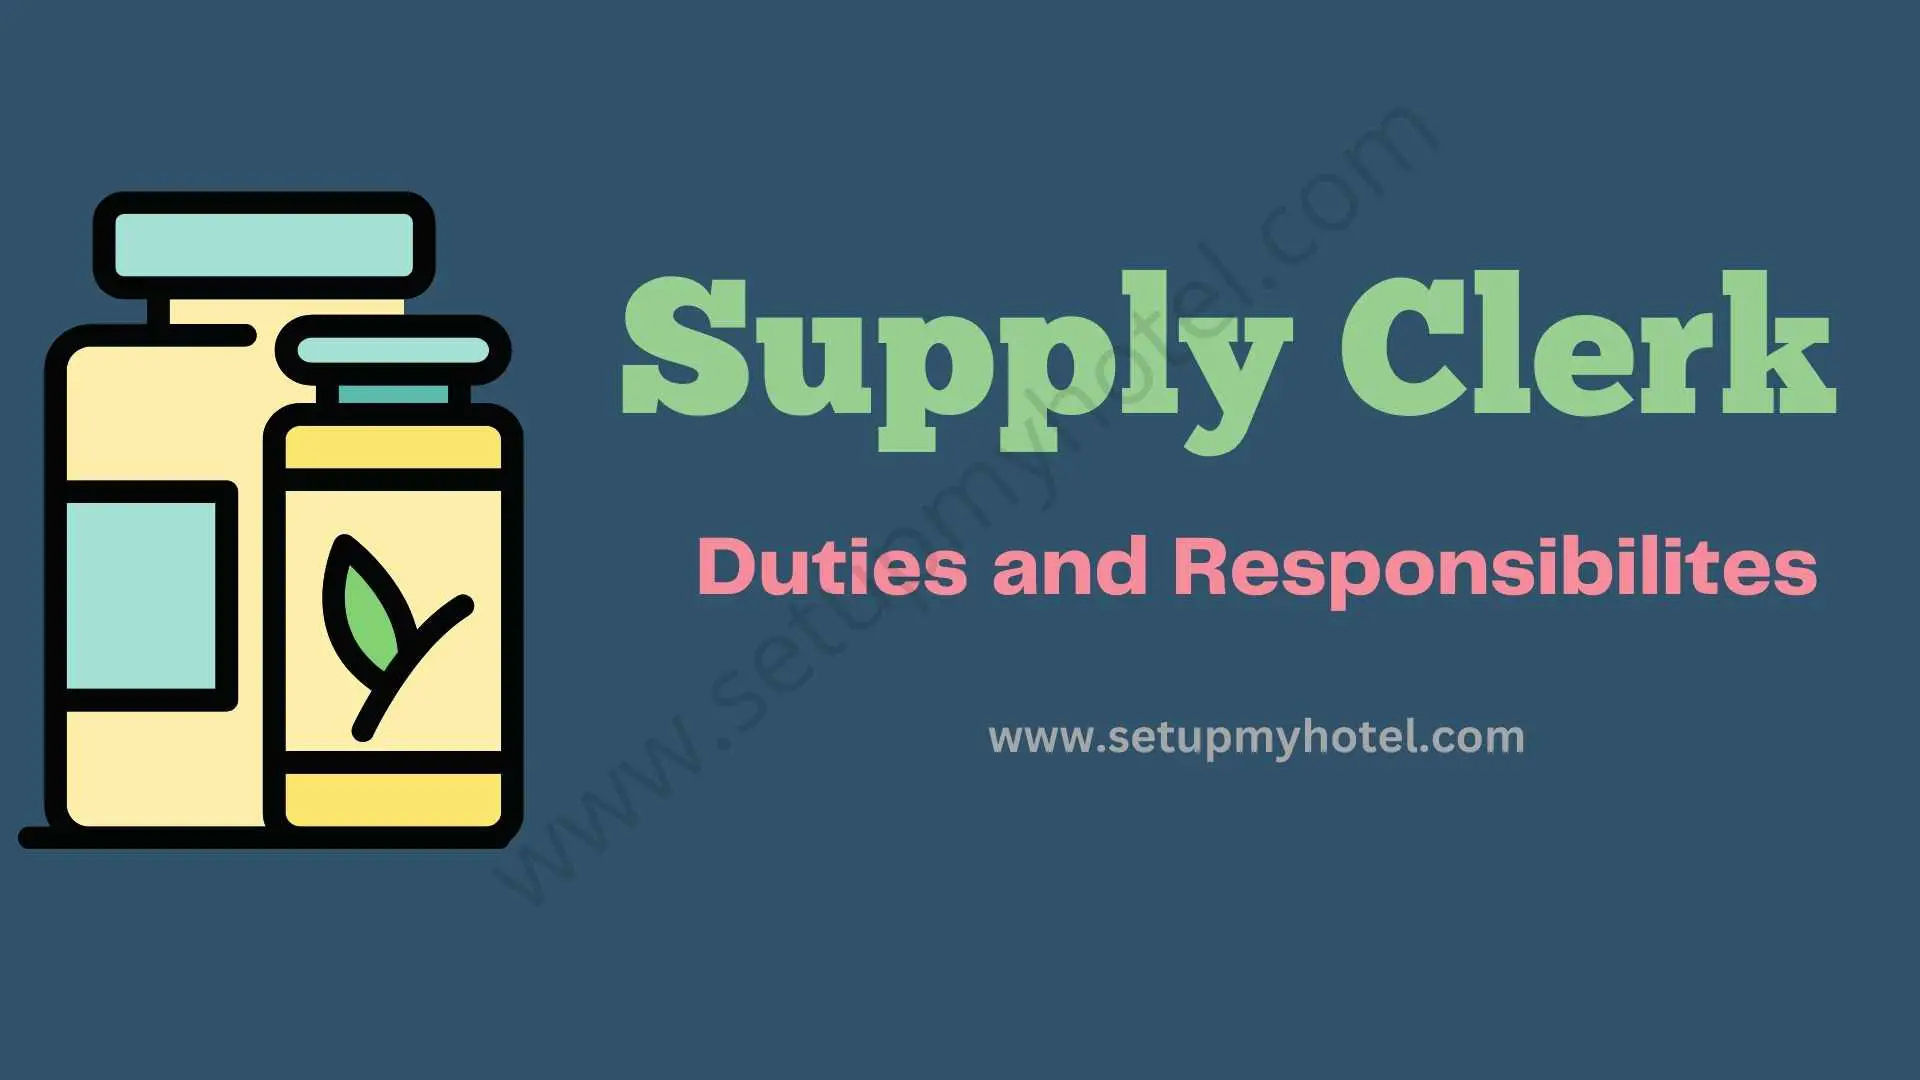 Supply Clerk Duties and Responsibilities. The role of a Supply Clerk in Hotels is a crucial one. The Supply Clerk is responsible for ensuring that all necessary supplies are available in sufficient quantity to meet the needs of the hotel's guests and staff. This includes everything from toiletries and linens to cleaning supplies and office products. The Supply Clerk is also responsible for maintaining accurate inventory records and ordering supplies as needed. They must be organized and detail-oriented, with strong communication skills to work effectively with vendors, colleagues, and hotel management. This role requires physical stamina, as the Supply Clerk must be able to lift and move heavy boxes and supplies. The ideal candidate will have a positive attitude, a strong work ethic, and a willingness to learn and adapt to changing needs and priorities. Overall, the Supply Clerk plays a vital role in ensuring that the hotel runs smoothly and guests have a comfortable and enjoyable stay.